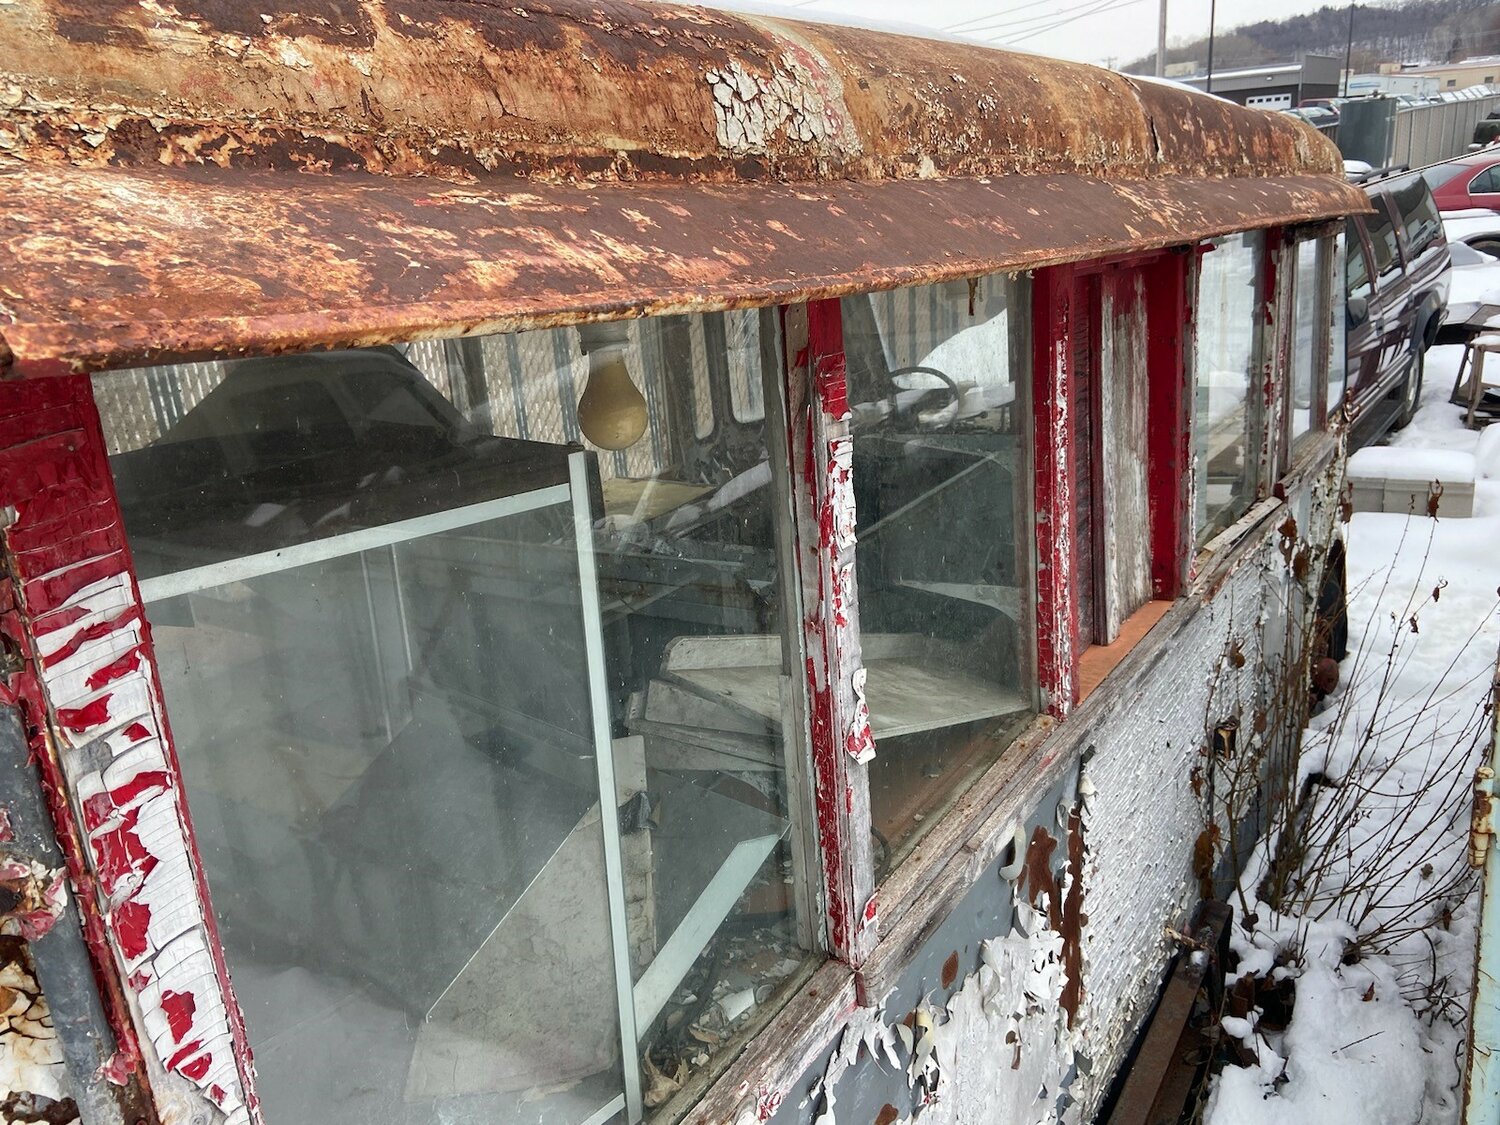 Poptcorn, or Pop’s Corn, has been rusting away for close to 20 years in Jerry’s parking lot on Main Street. A group of dedicated community volunteers vows to restore the old snack wagon to its former glory.